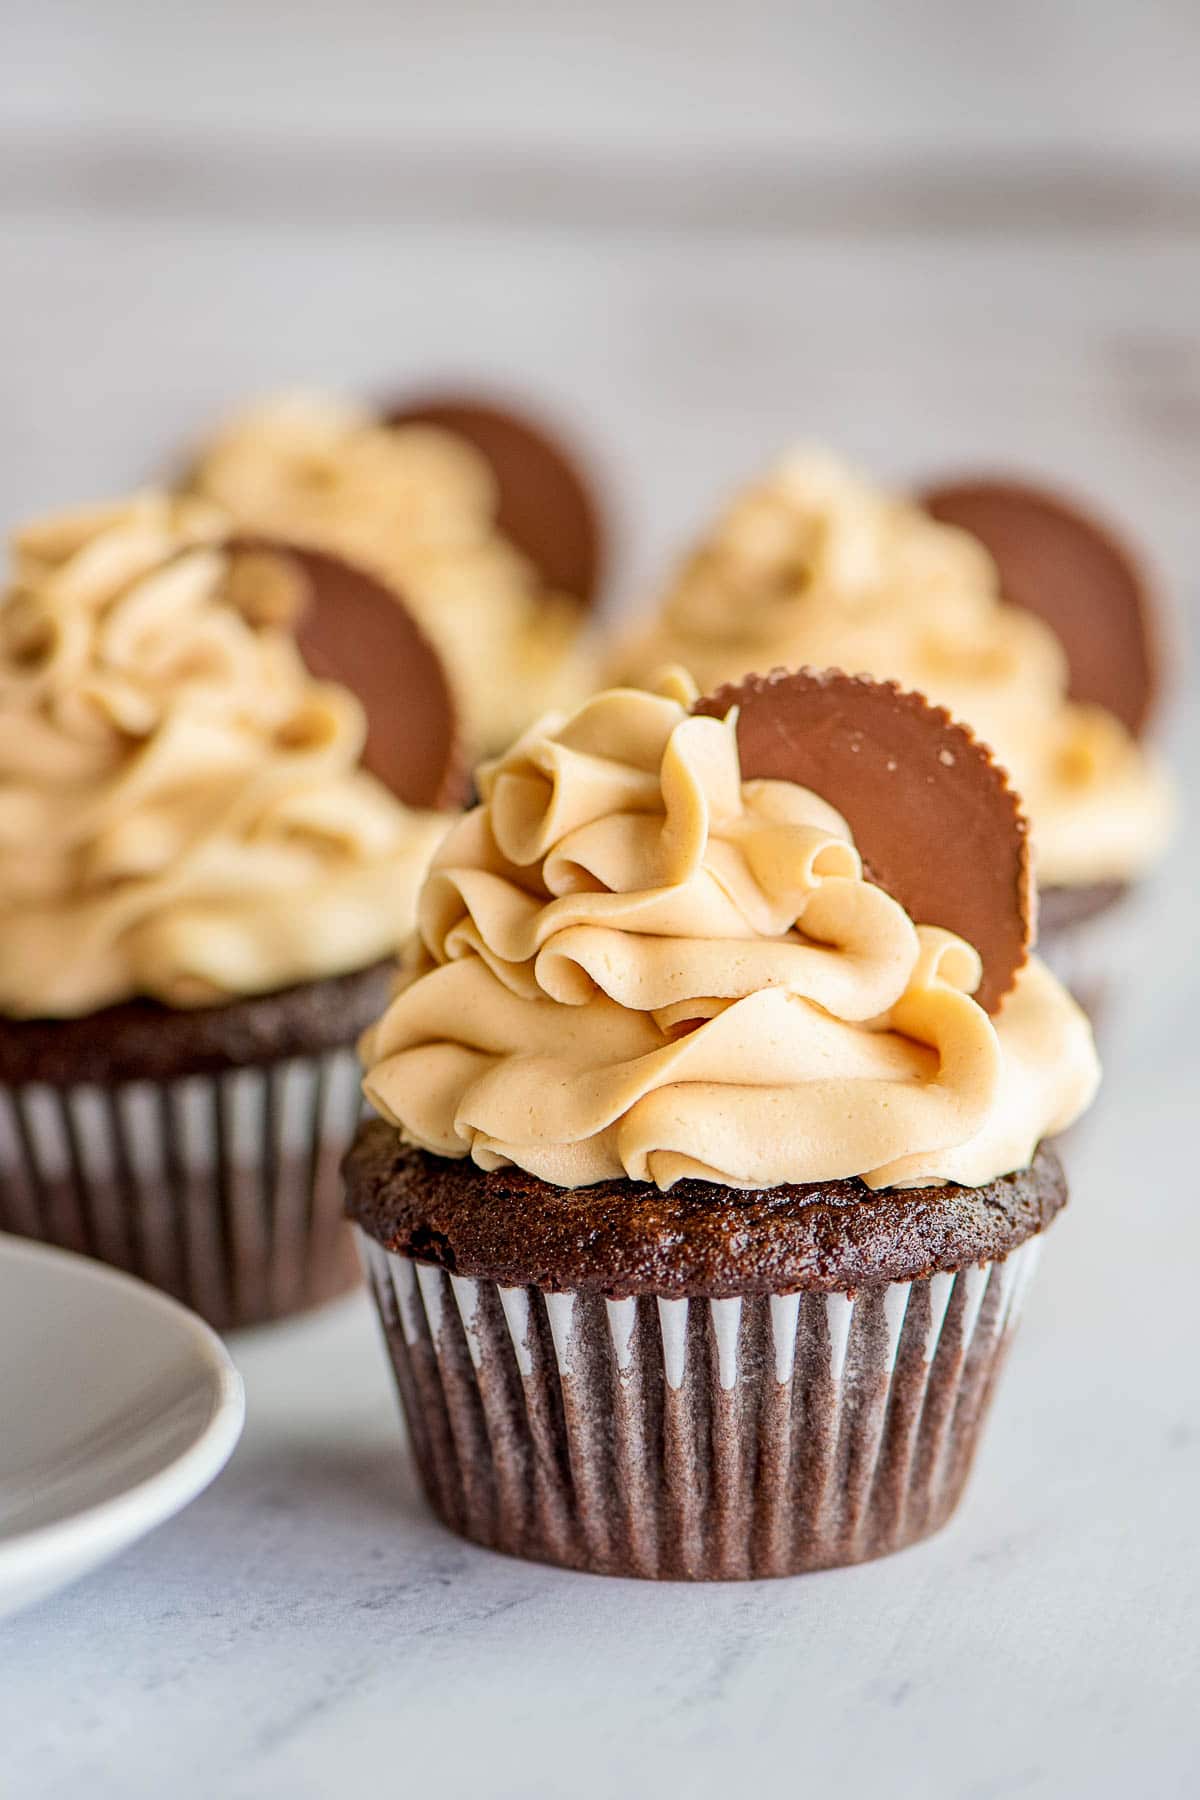 peanut butter frosting on chocolate cupcakes 